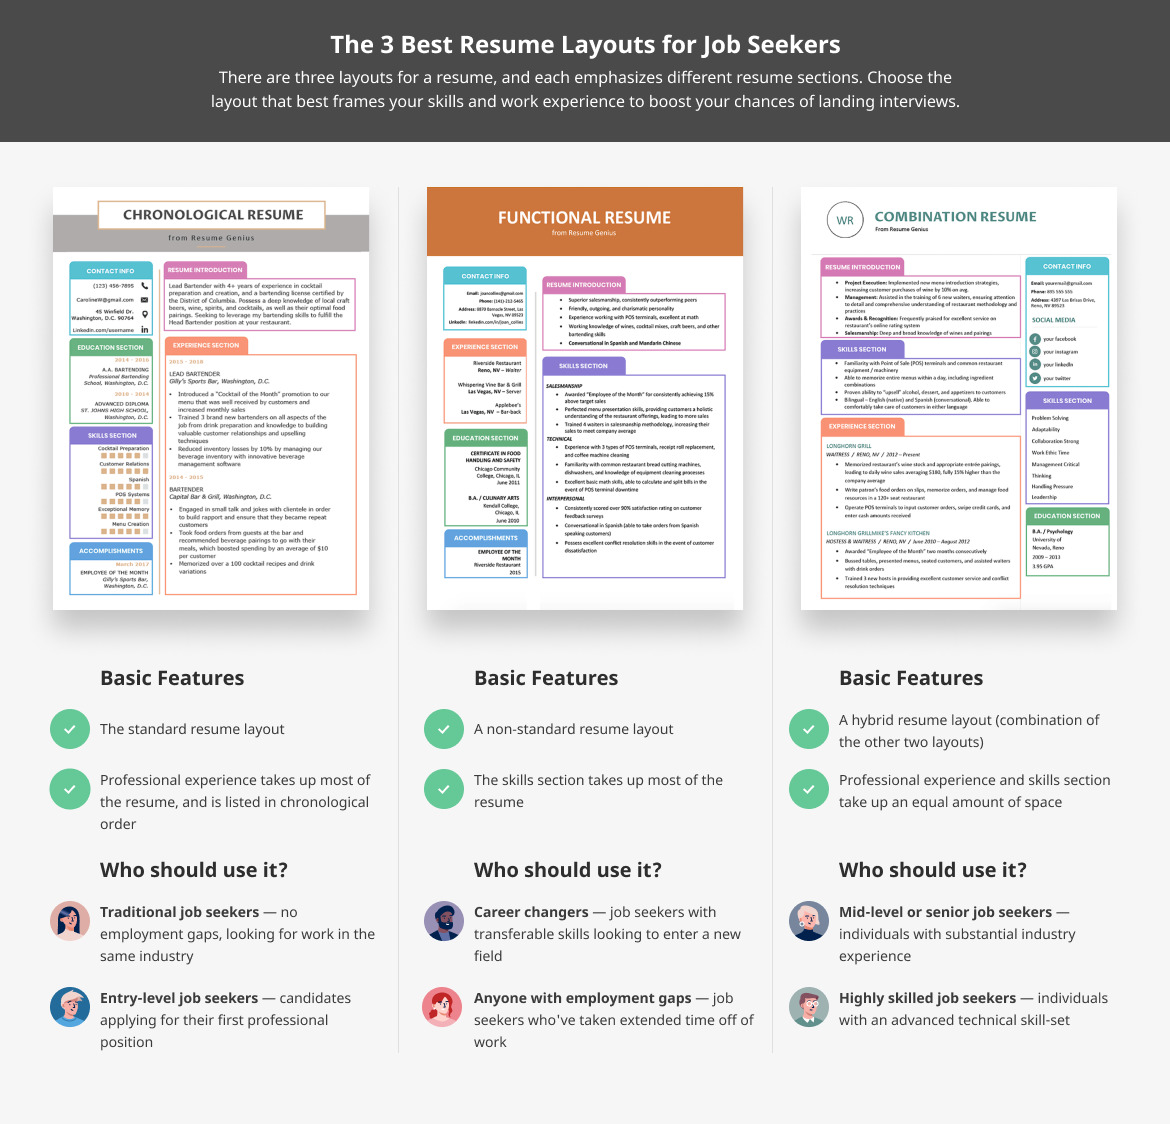 An infographic breaking down the three best layouts for a resume